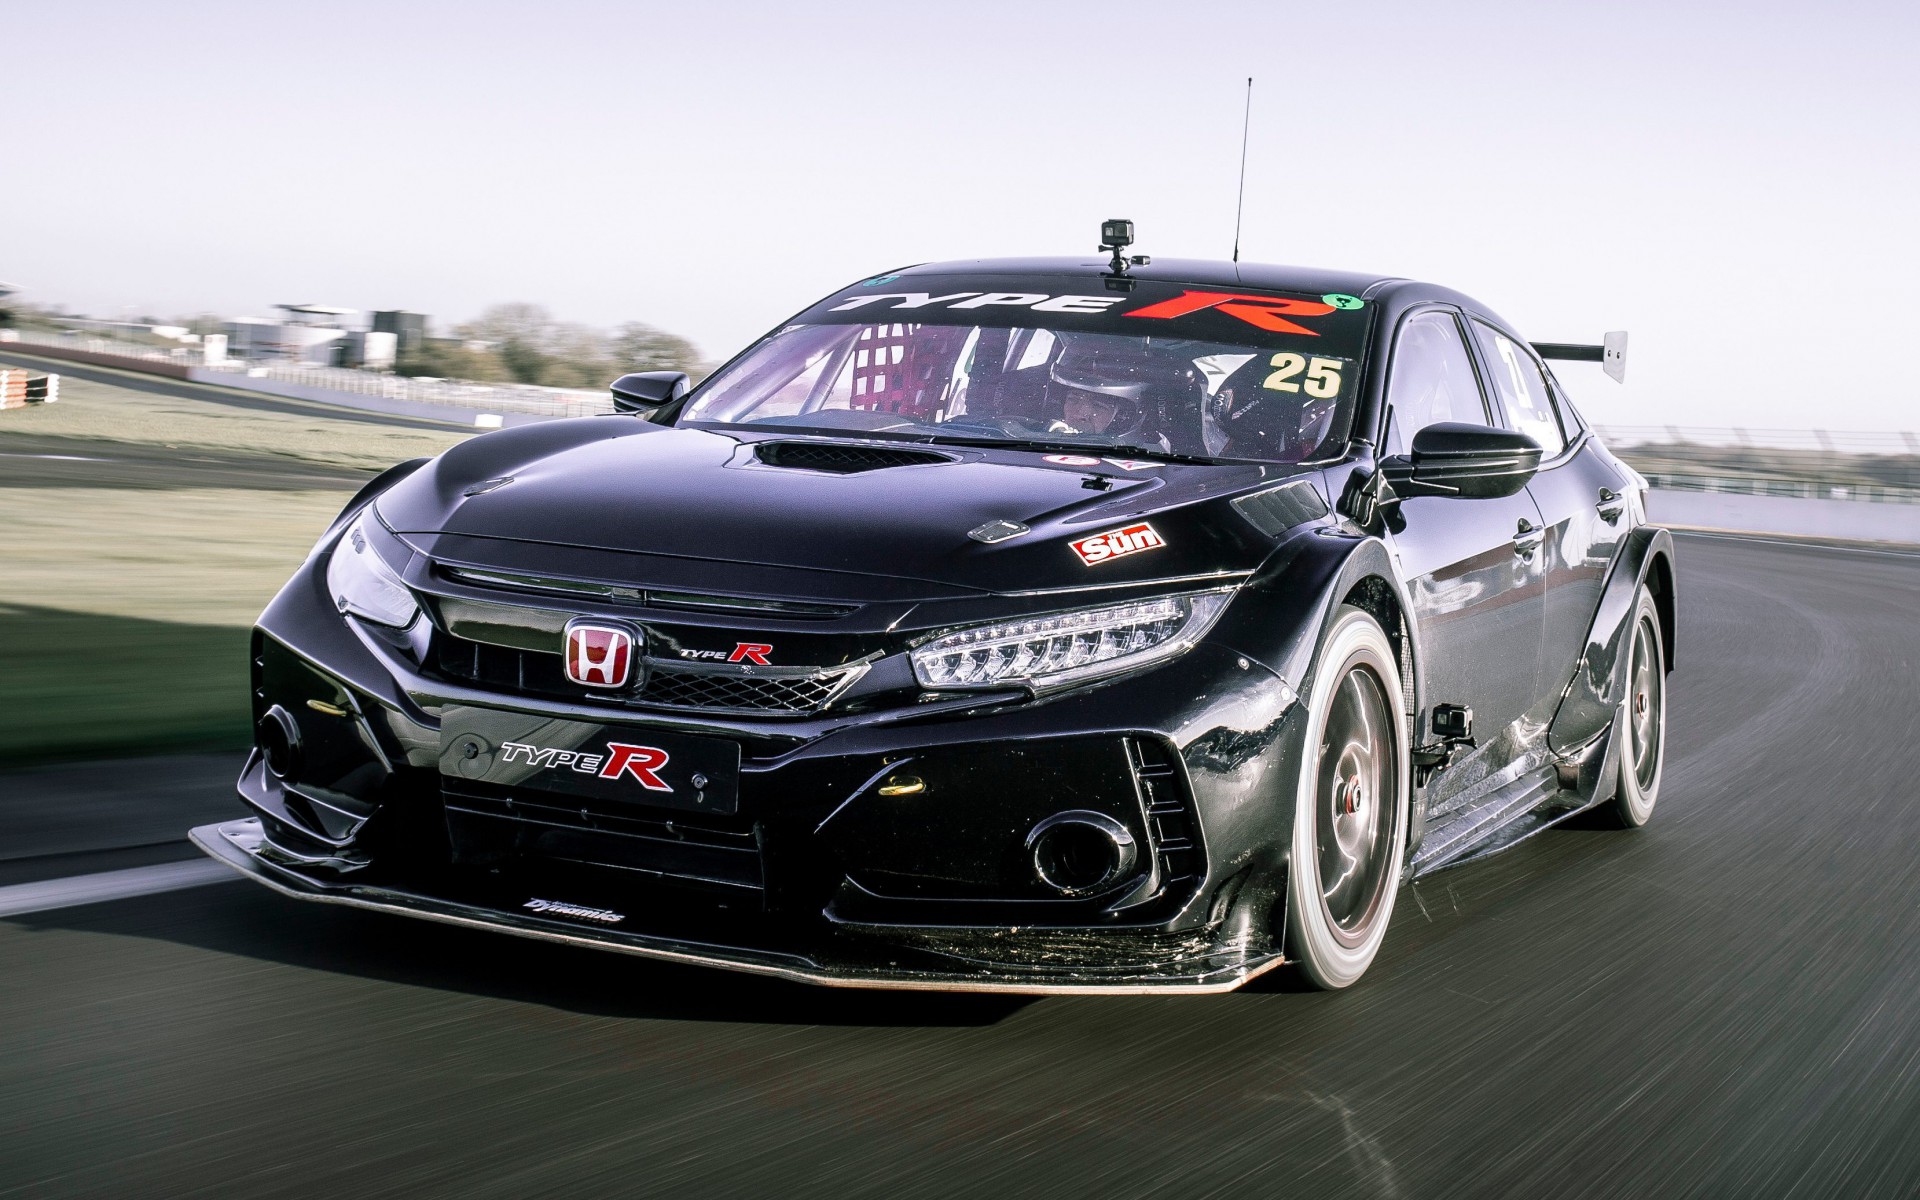 The Honda Civic Race Car is really quick but has less grip than Bambi